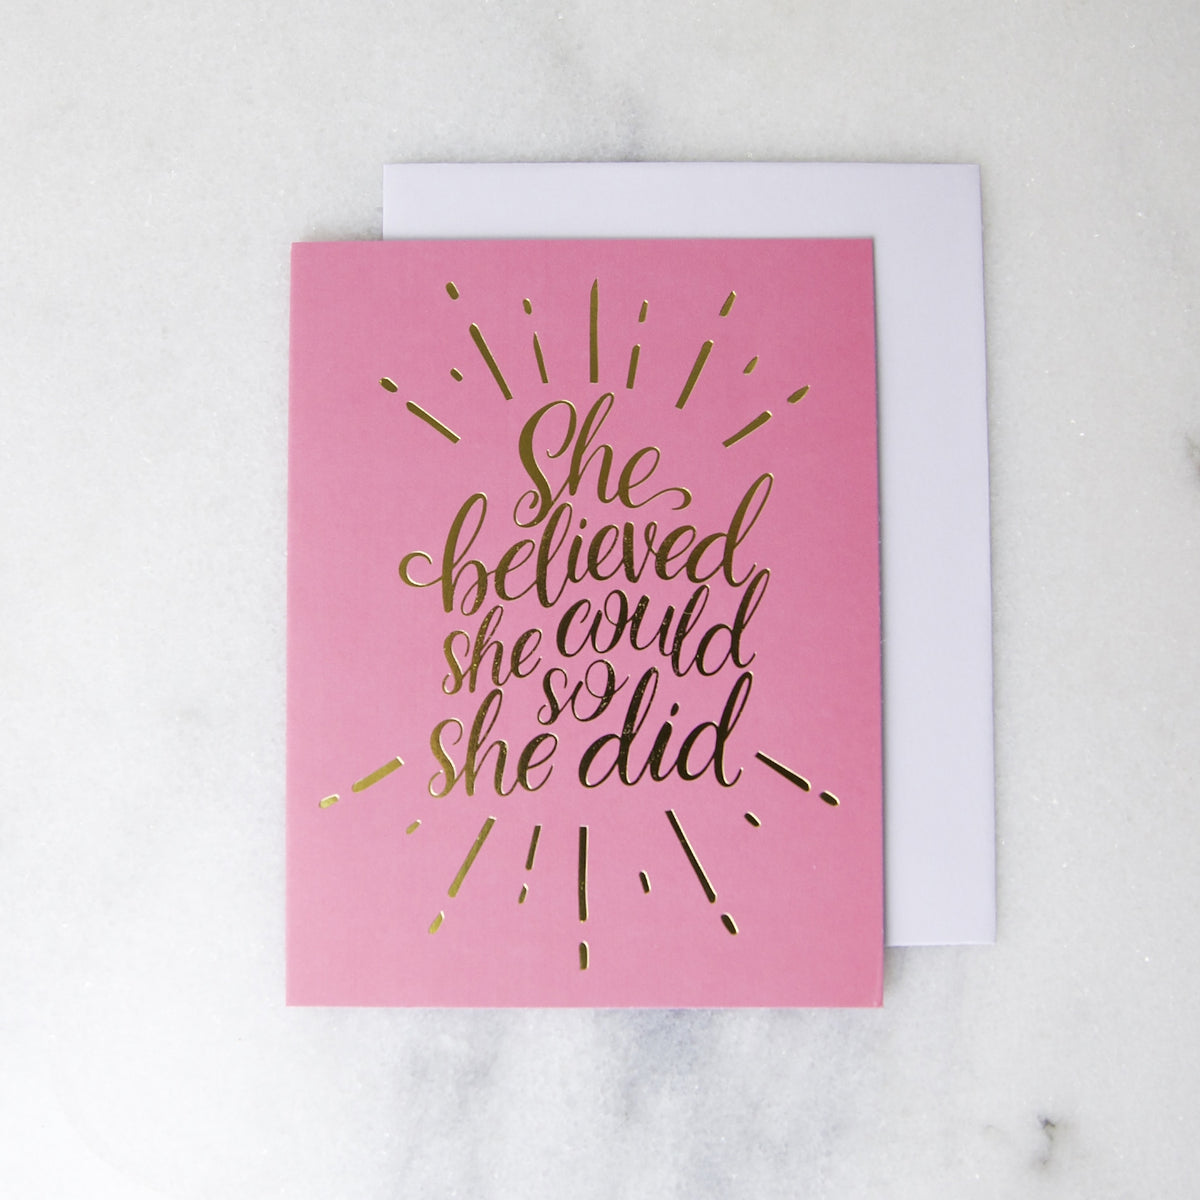 GREETING CARD "SHE BELIEVED"